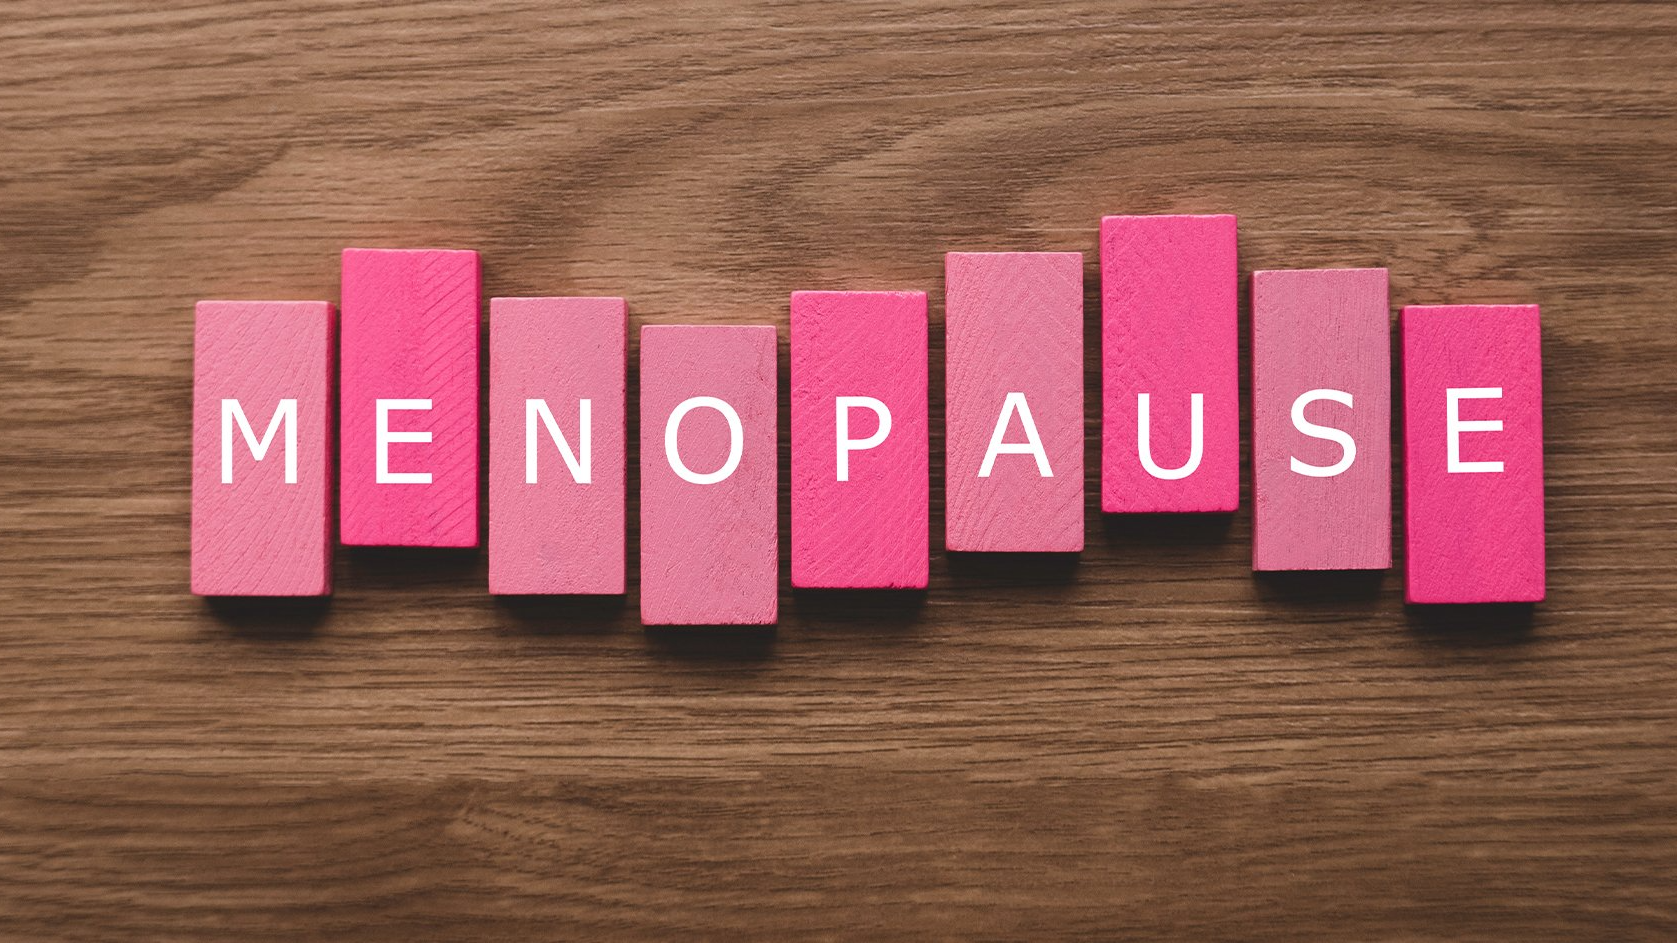 Premature surgical menopause can significantly raise risk of muscle disorders: Study